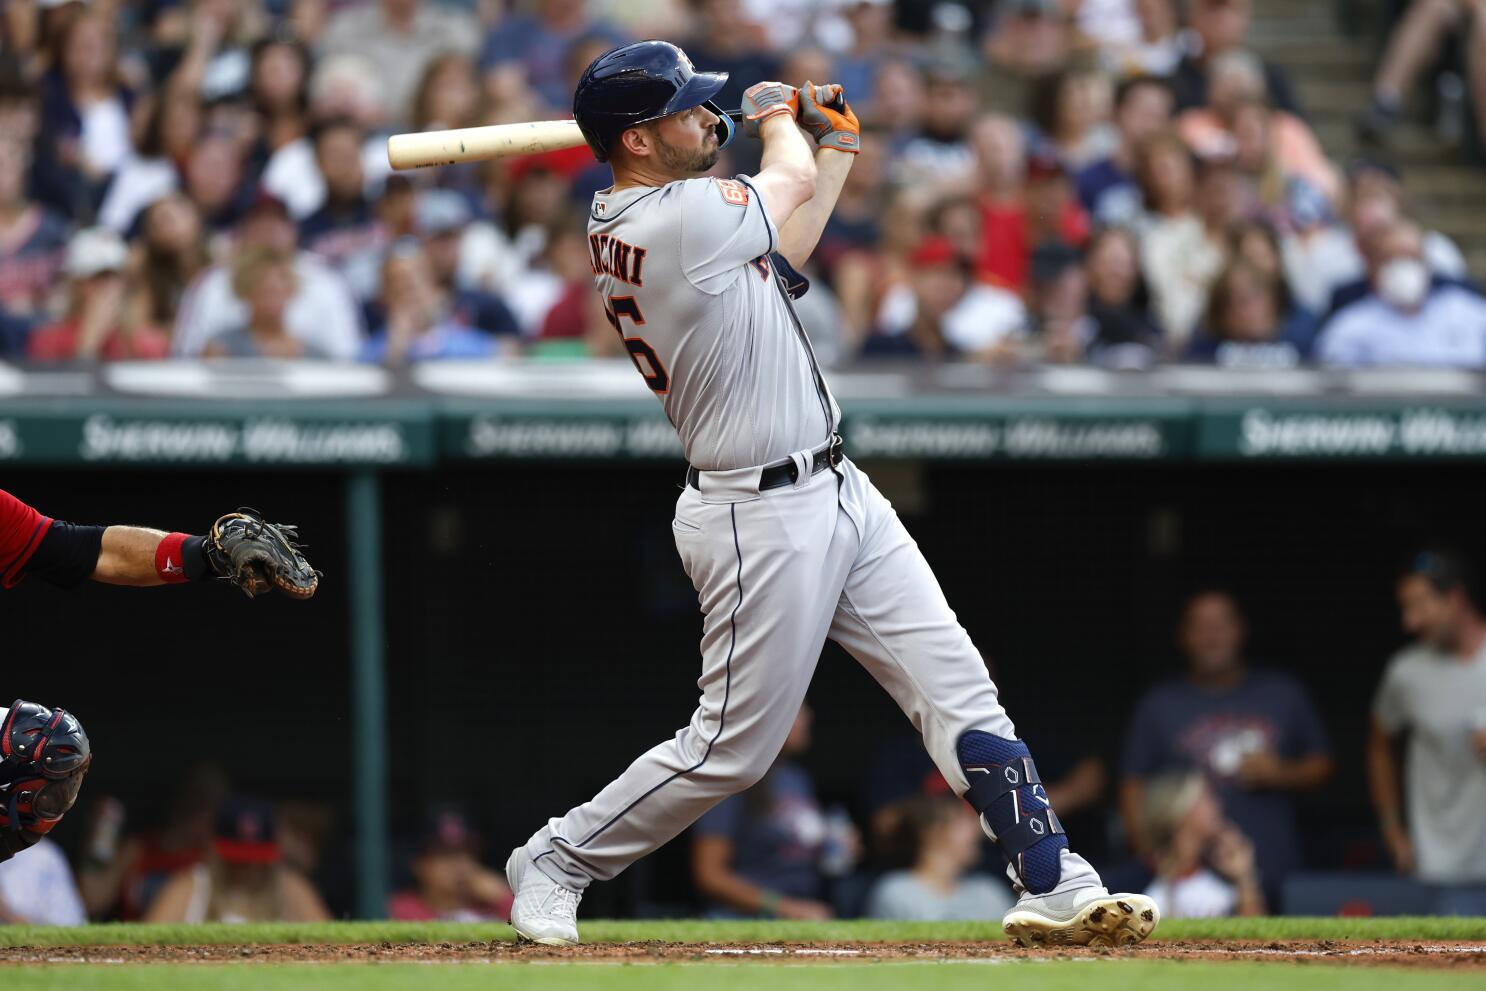 Mancini grand slam among 2 HRs as Astros top Guardians 9-3 - The